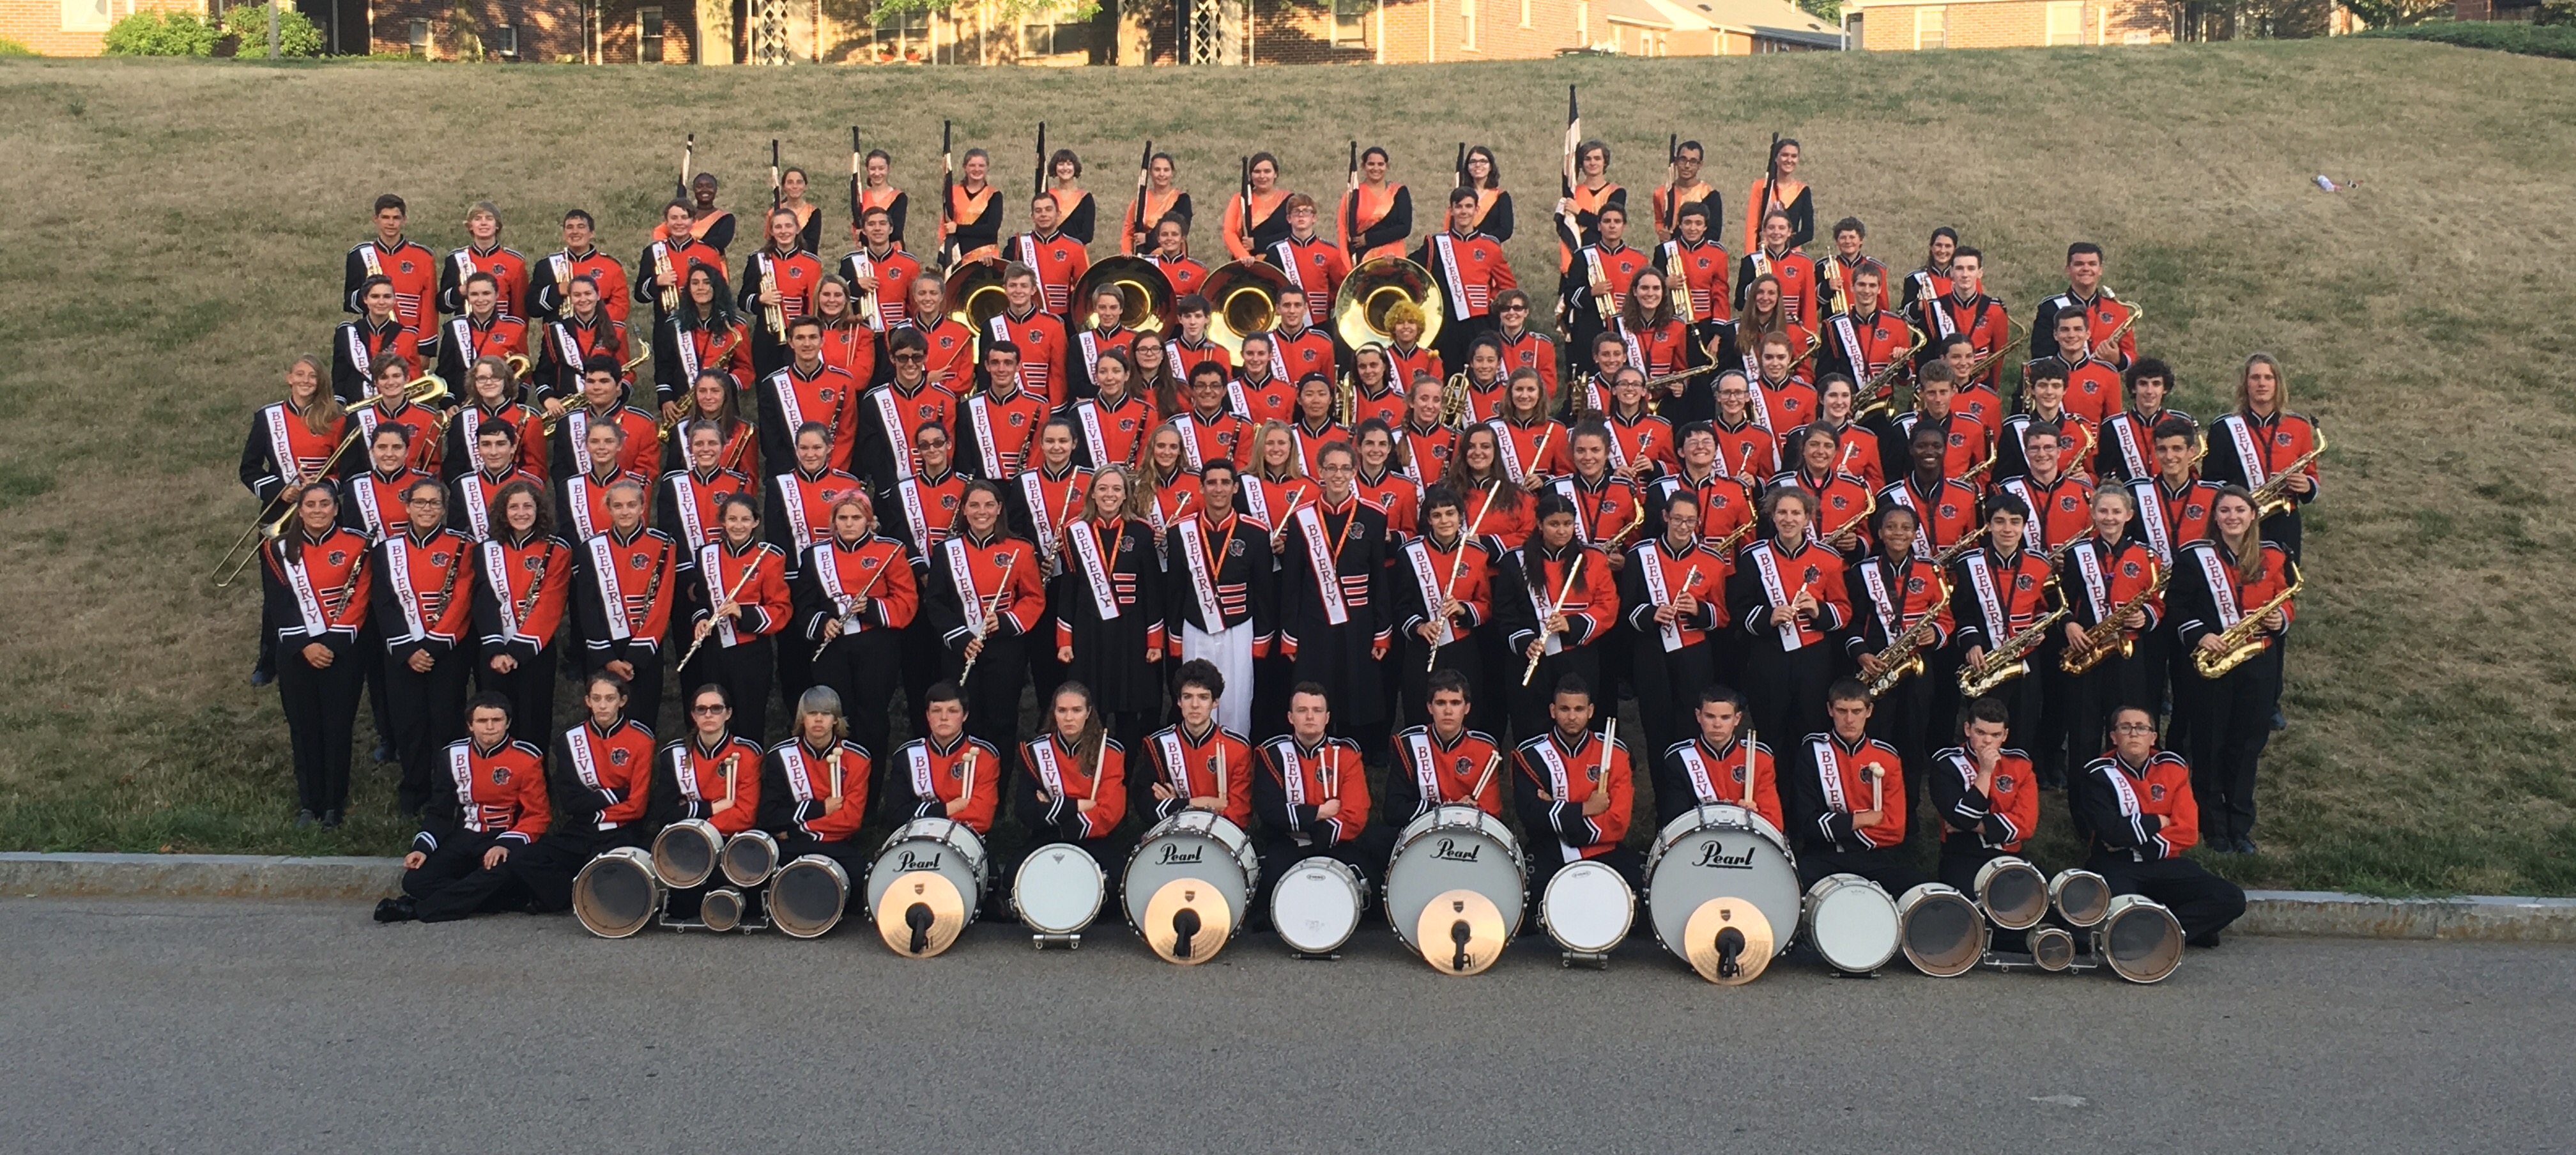 bhs marching panther band